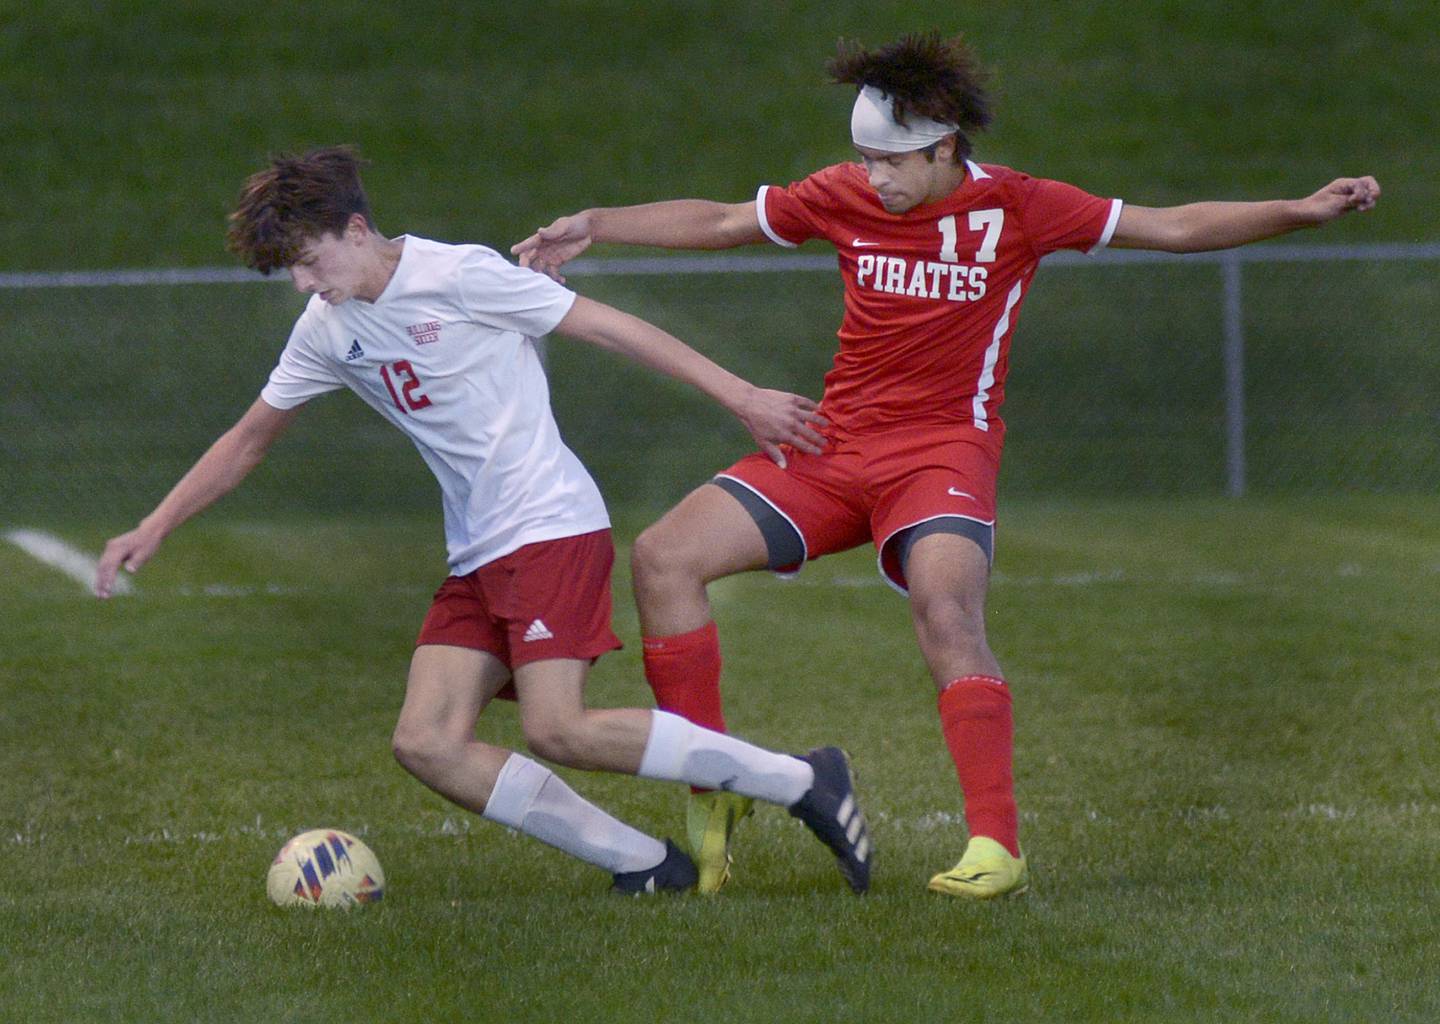 Streator’s Aaron Henson gets the ball past Ottawa’s Alan Sifuentes during the first half of Tuesday's match at Ottawa.